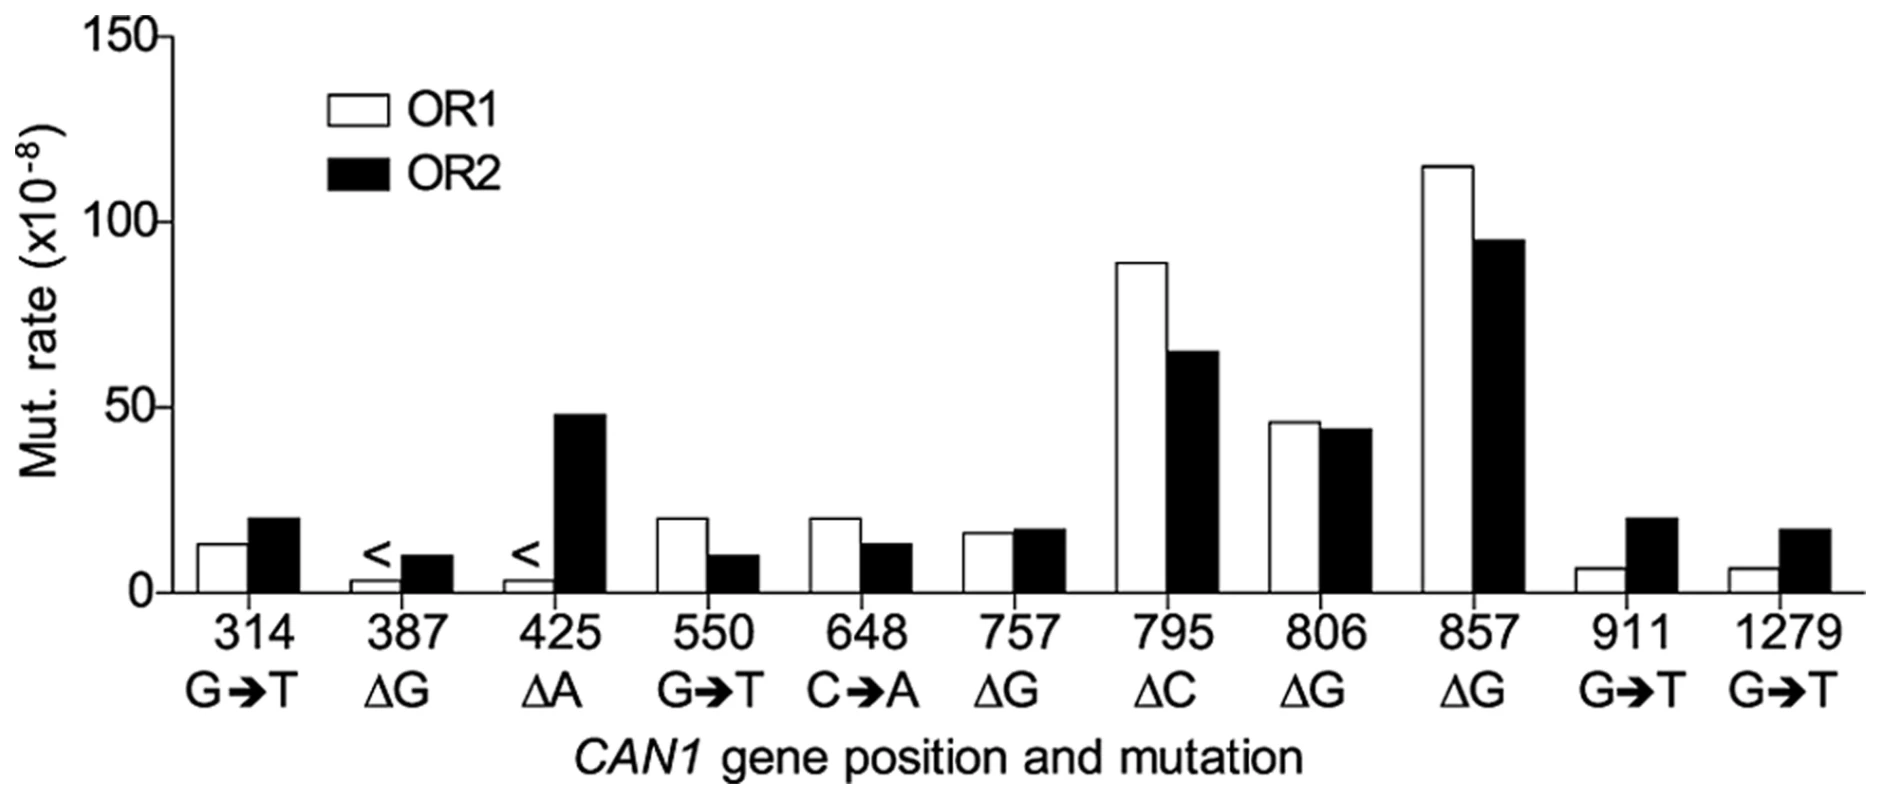 Comparison of <i>CAN1</i> mutation rates at hotspots (predominant mutation at site) in <i>rnr1-Y285A</i> strains with natural (OR1) and reversed (OR2) orientation of the <i>CAN1</i> gene.